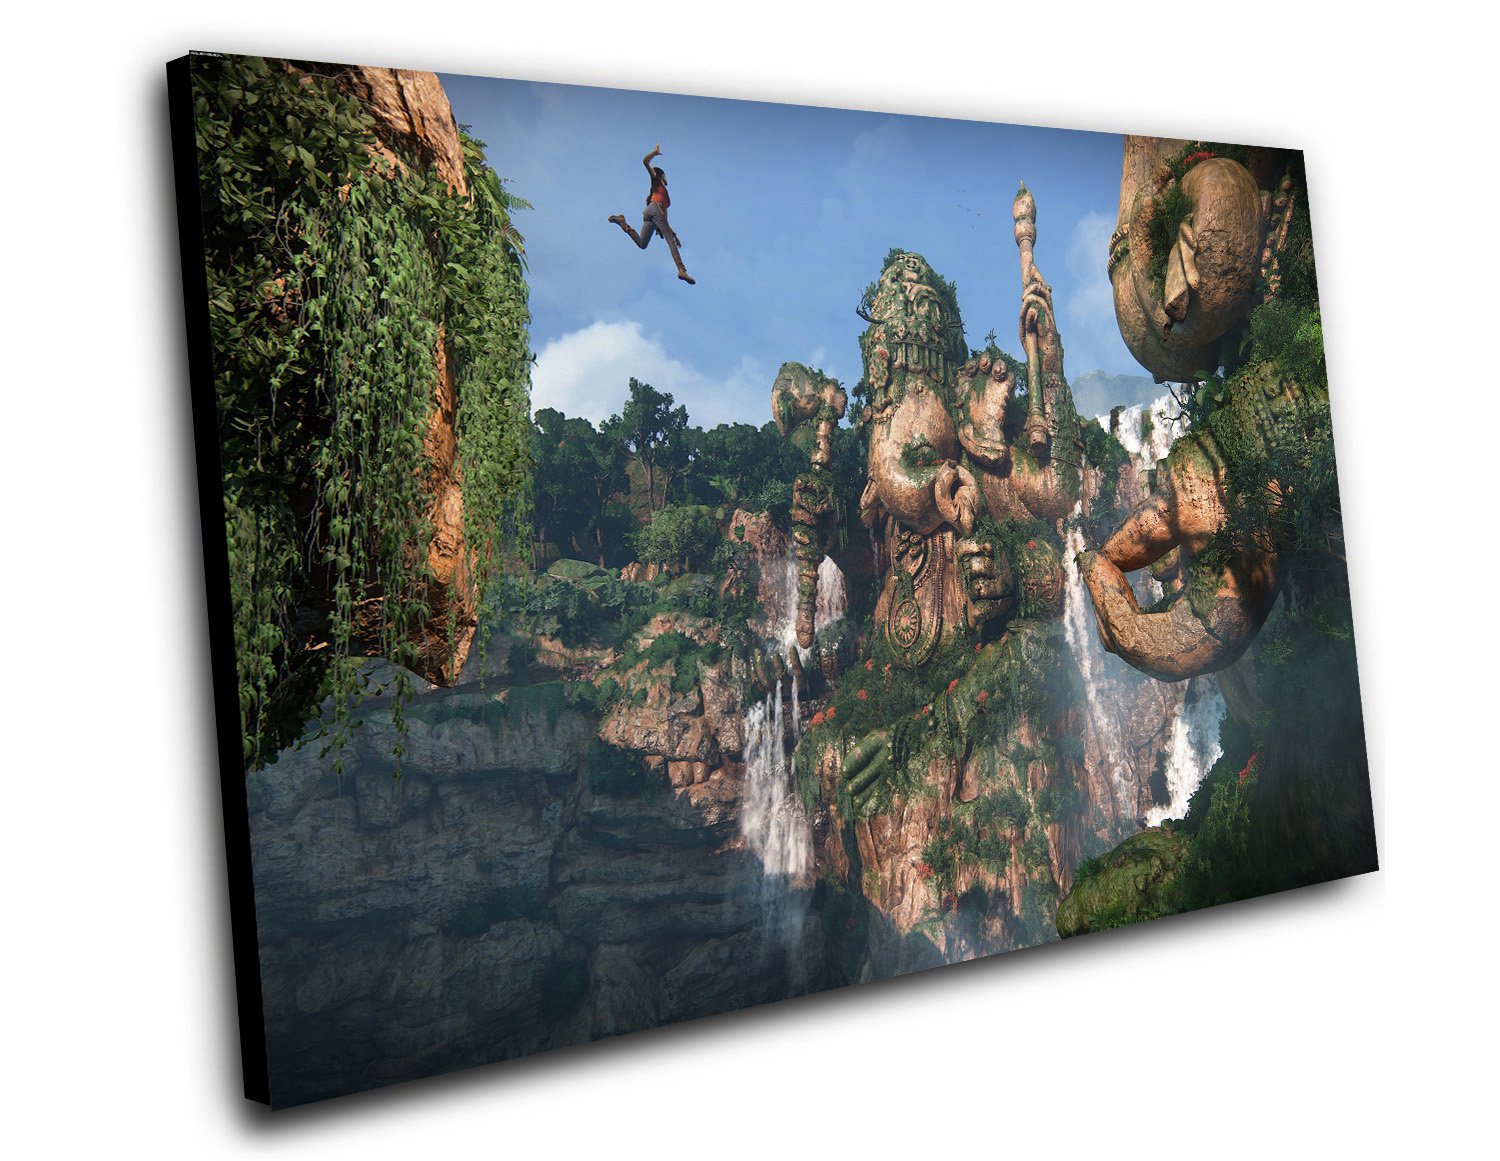 Uncharted The Lost Legacy Game 8"x12" (20cm/30cm) Canvas Print